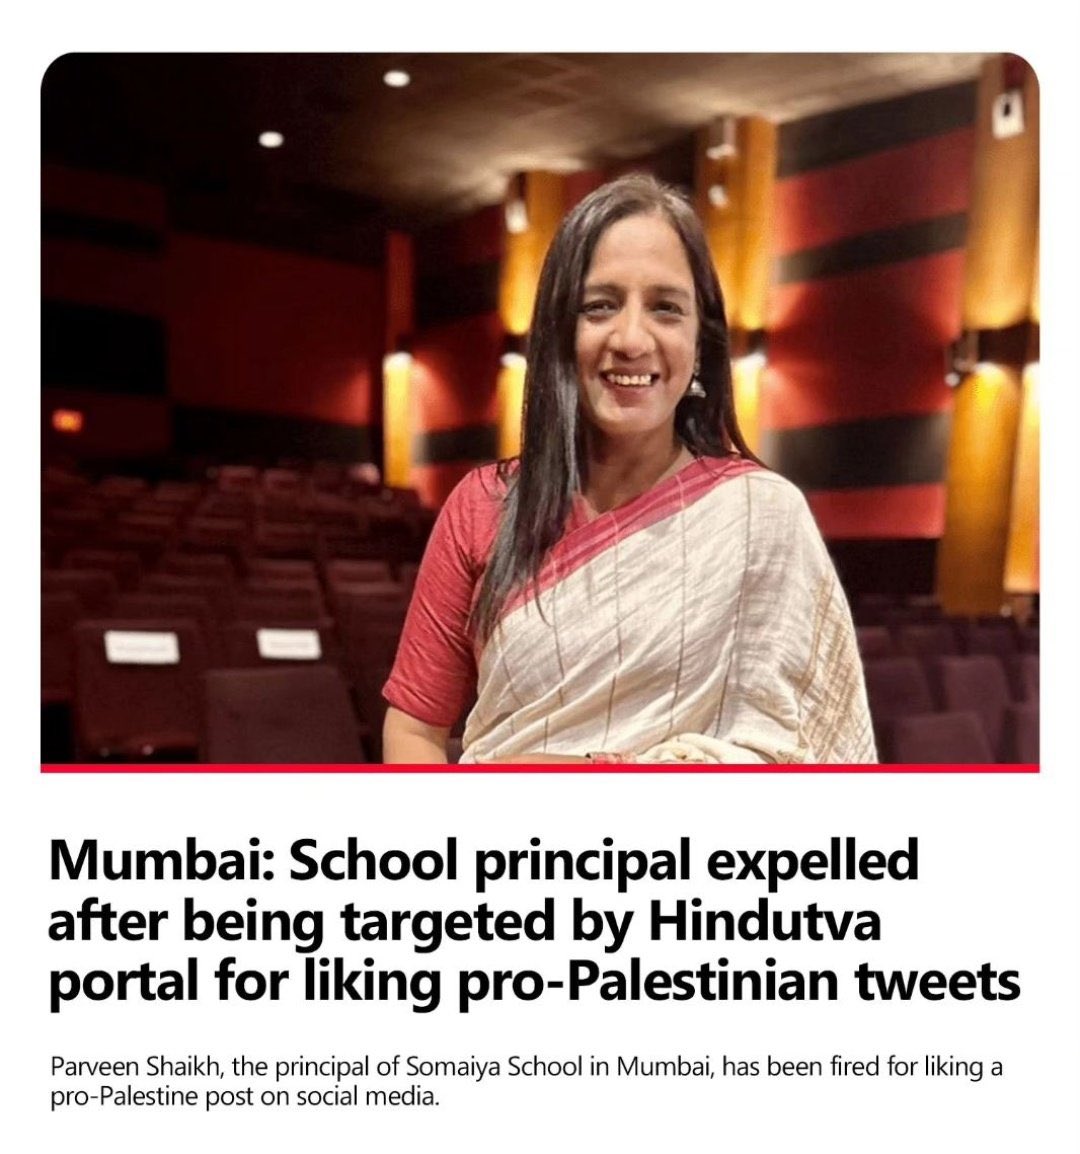 Islamophobia in India 

A Muslim Principal was sacked for liking Pro-Palestine posts on social media
#BJPHataoDeshBachao #RejectBjp #DefeatBJP